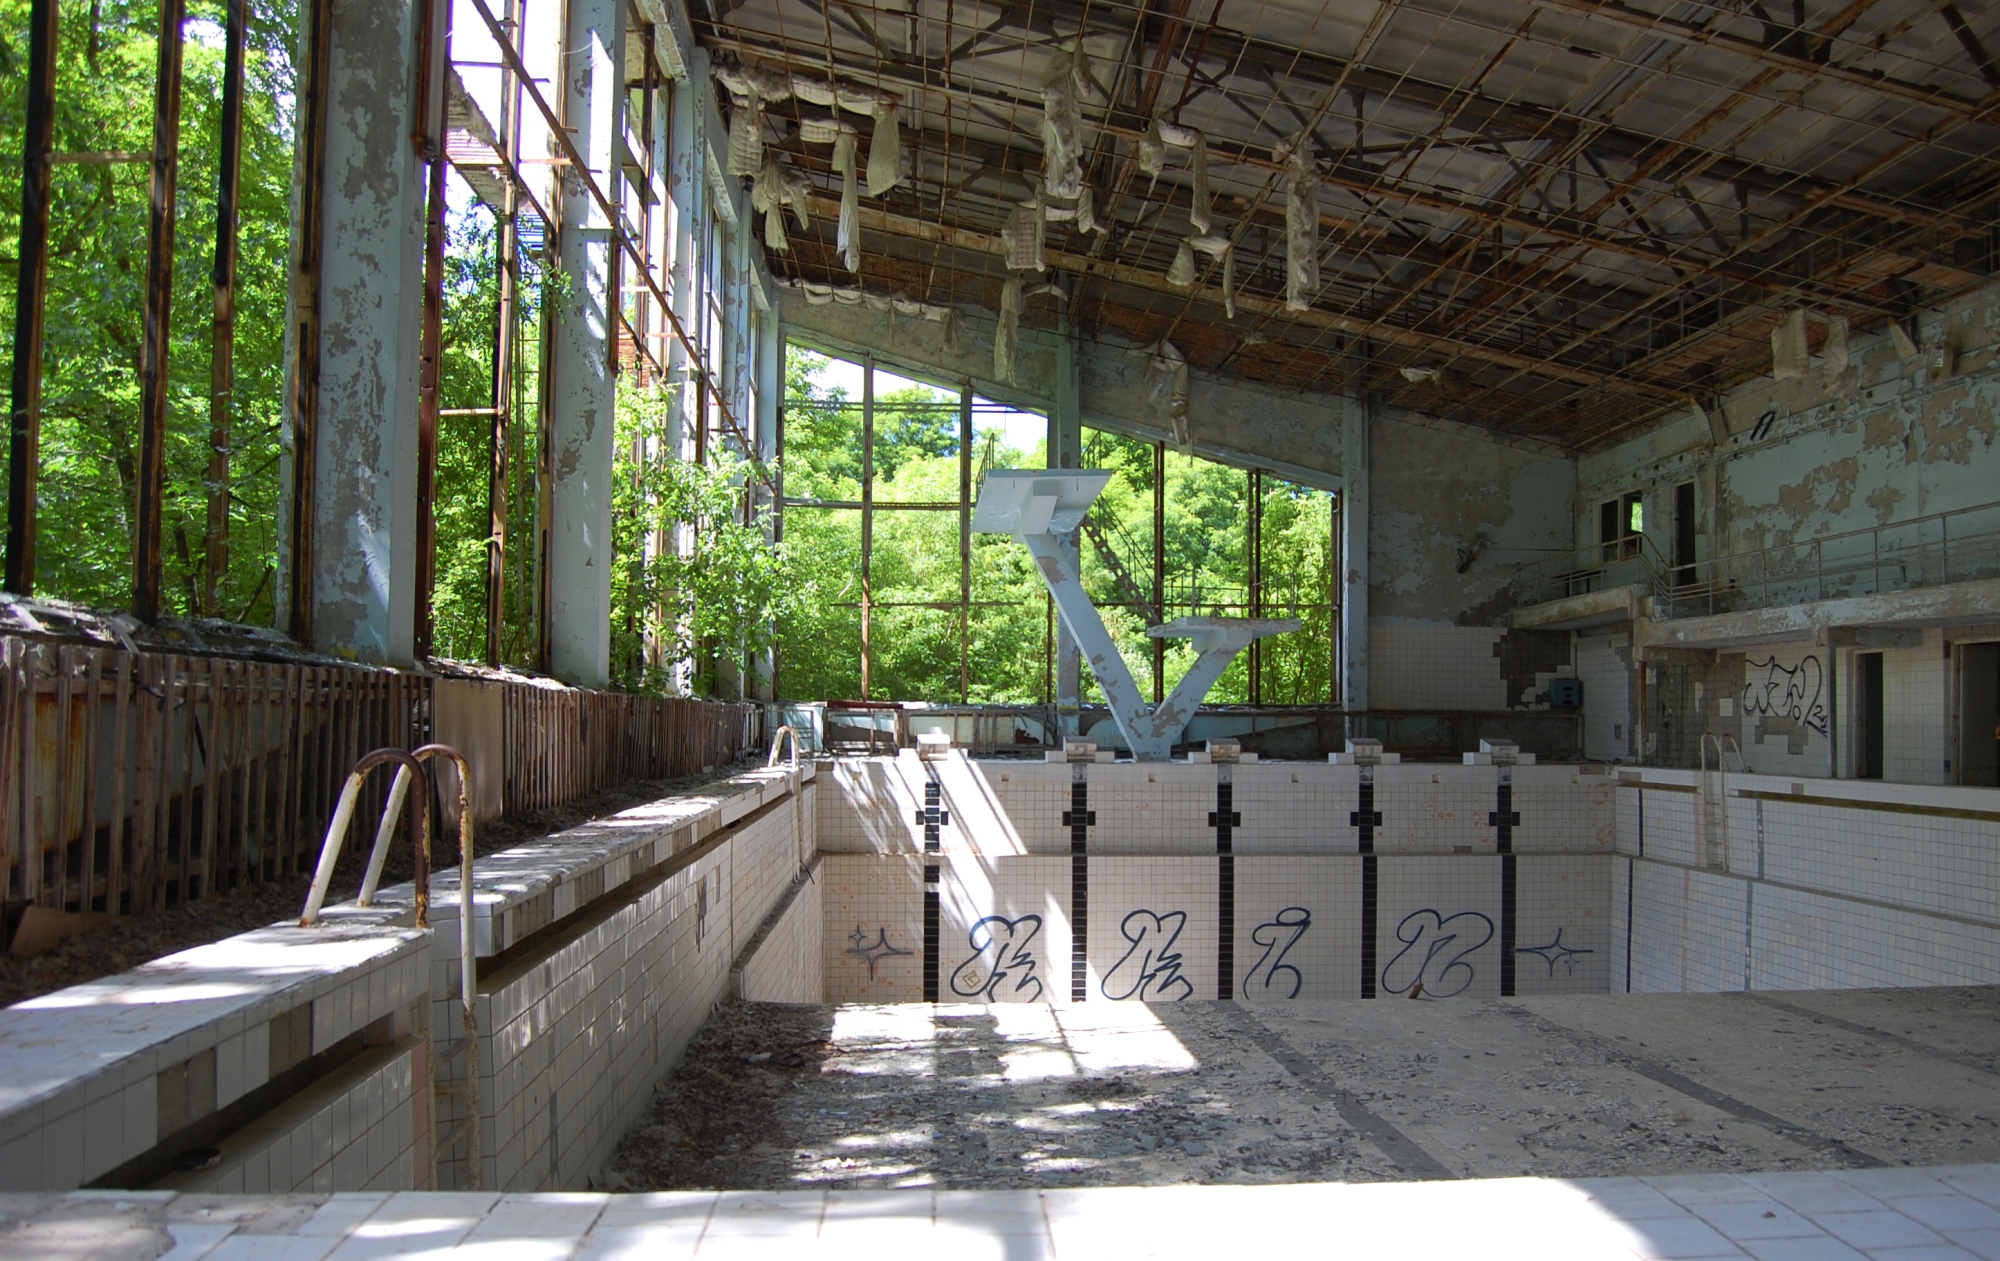 Visiting Chernobyl, depending on your guide, will let you explore a lot of the abandoned buildings of the town of including this swimming pool.